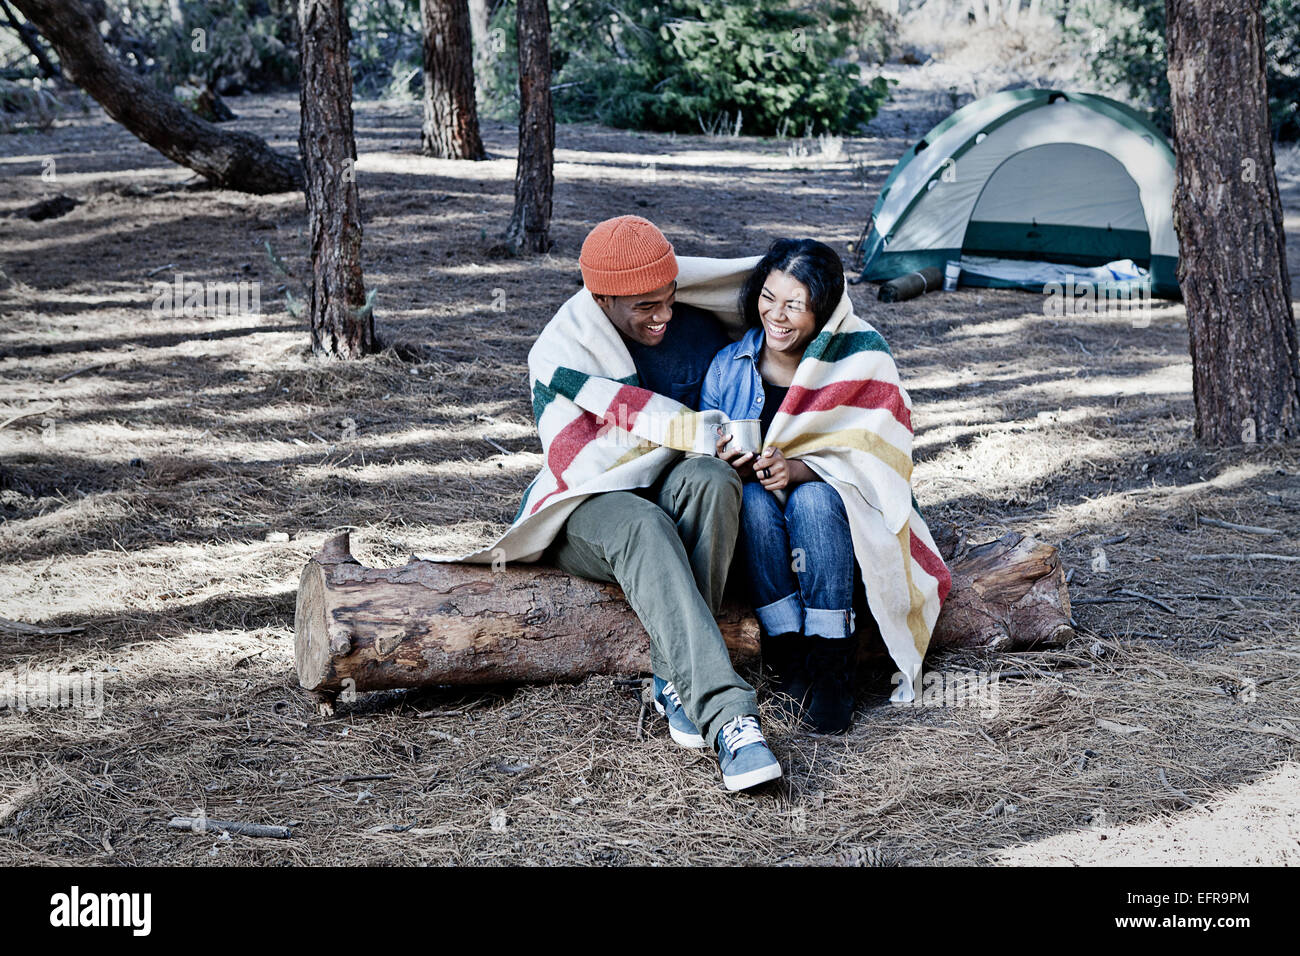 Young camping couple sitting on log wrapped in blanket Stock Photo